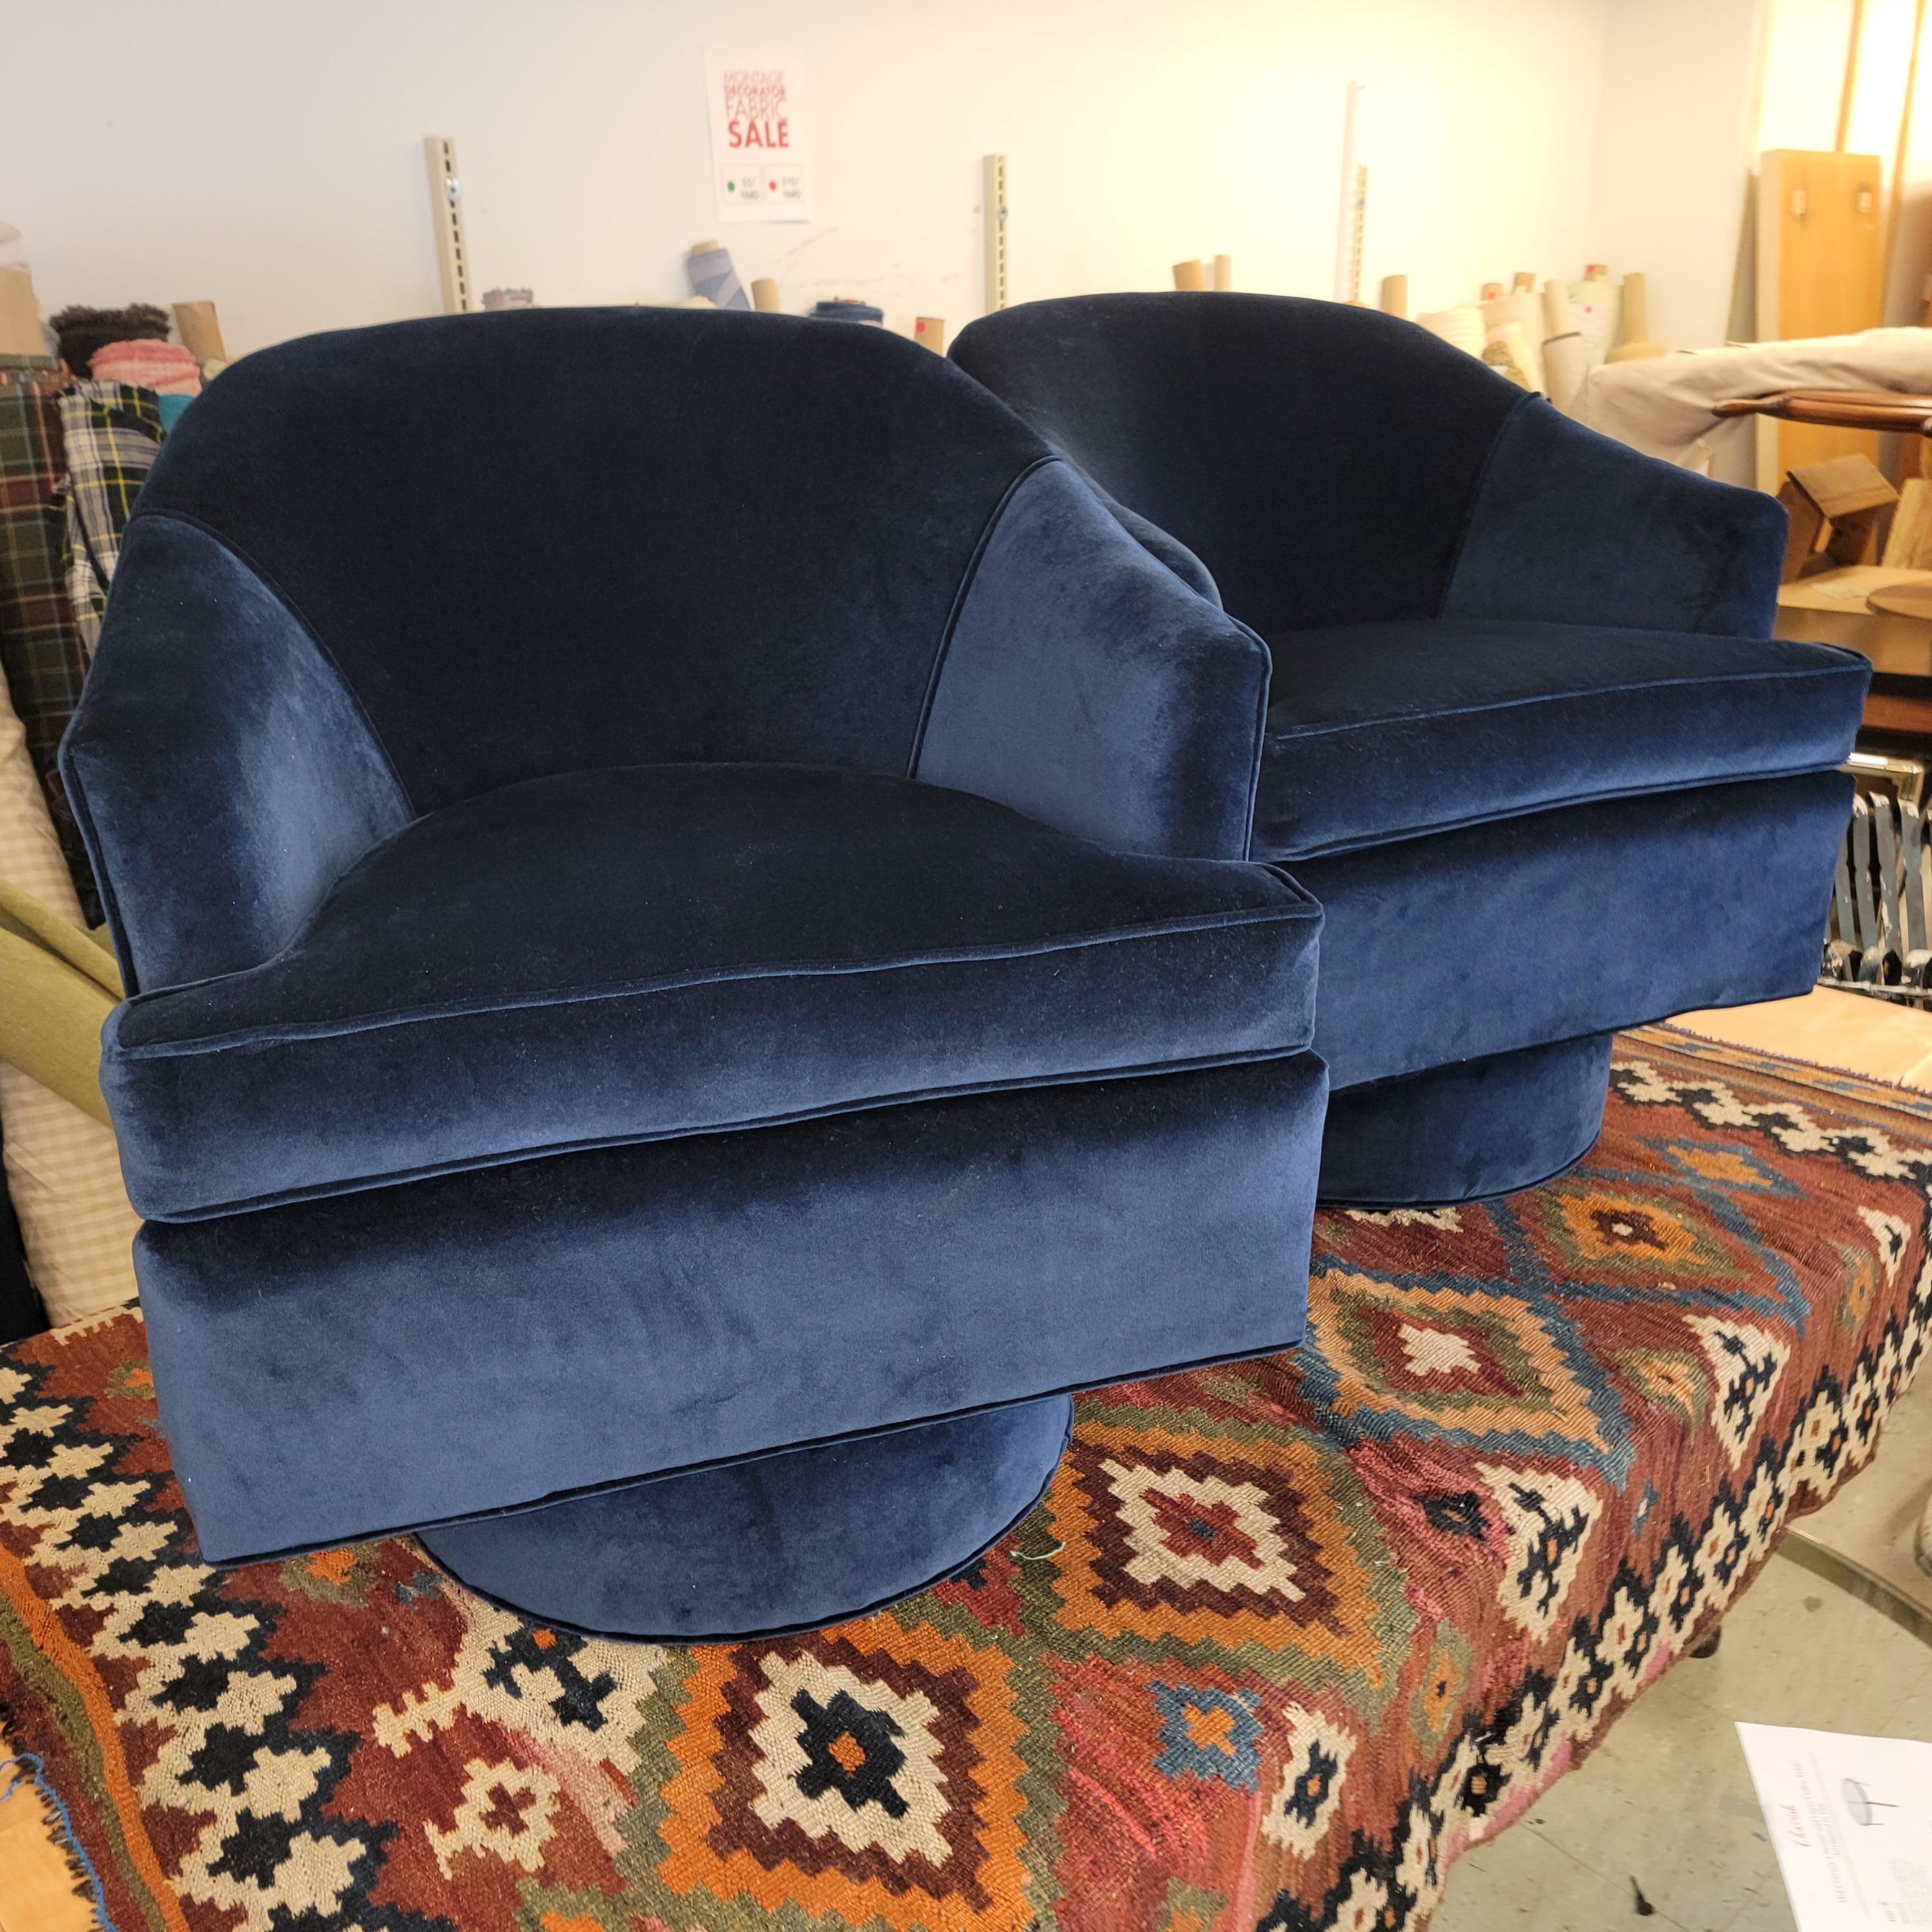 American Navy Blue Drexel Swivel Chairs For Sale